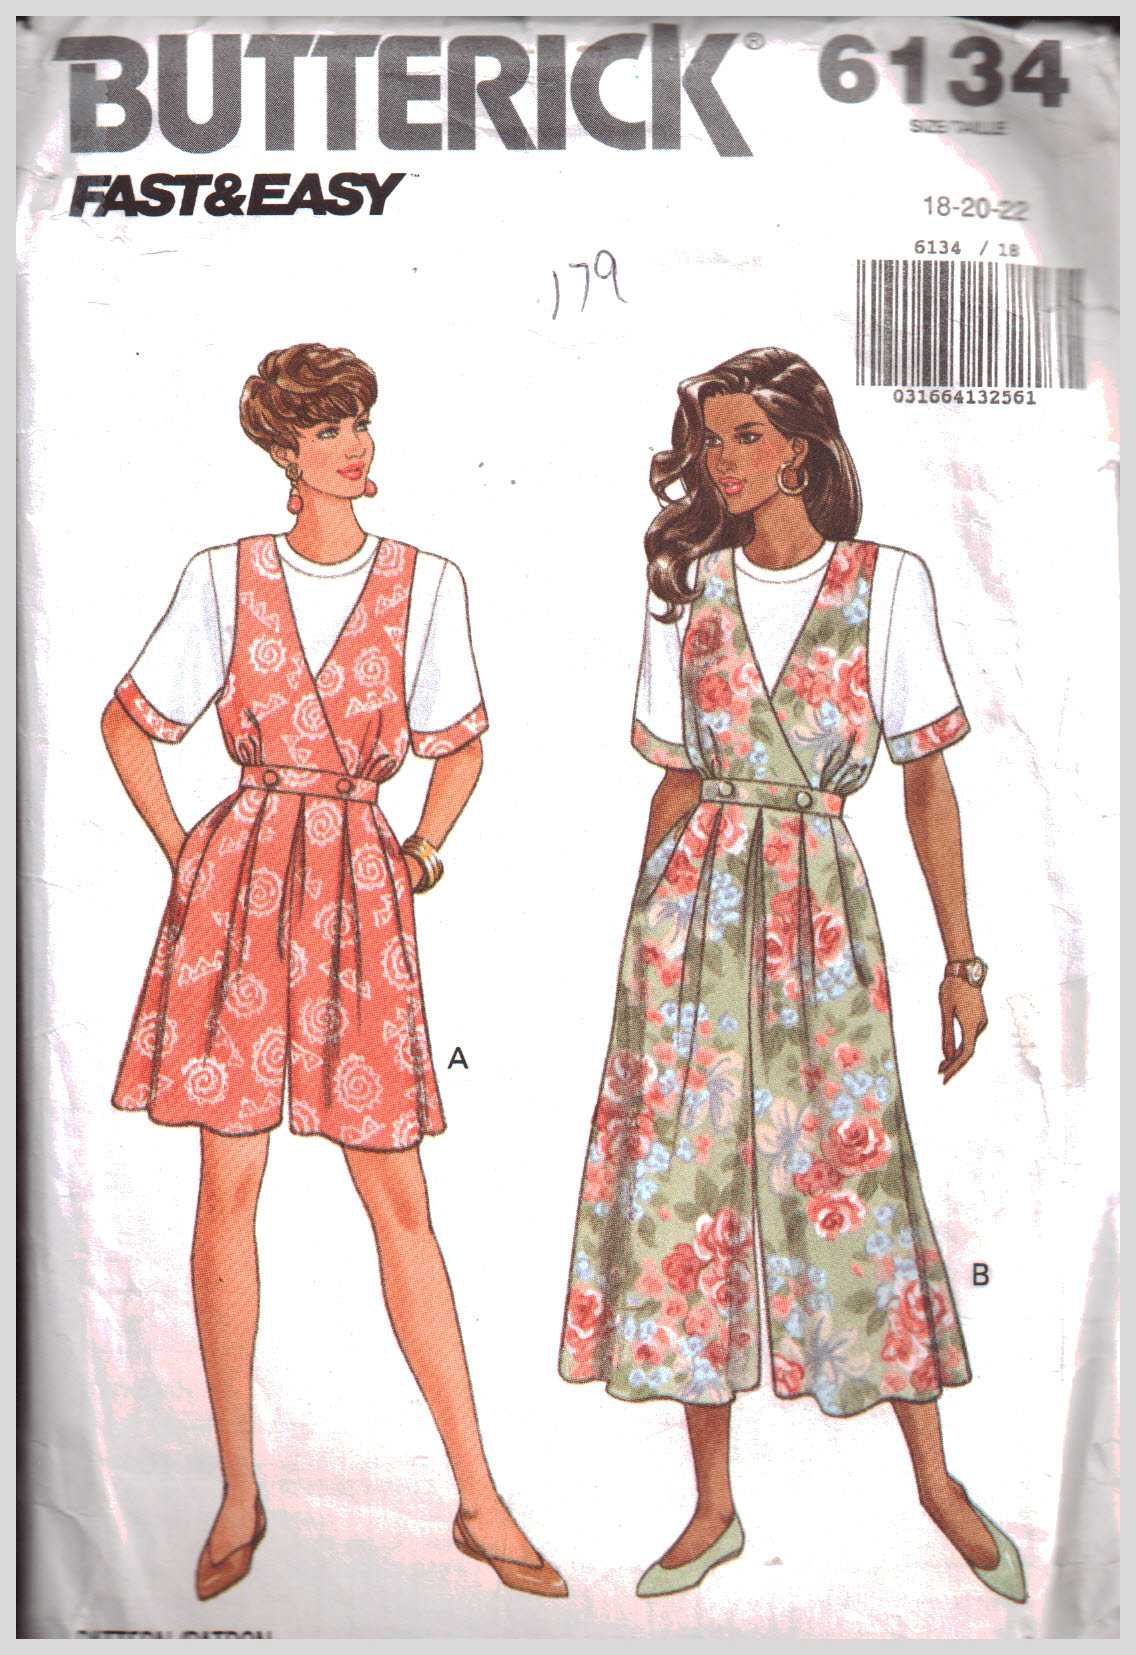 Butterick 6134 Tops, Culotte Dresses Size: 18-20-22 Used Sewing Pattern